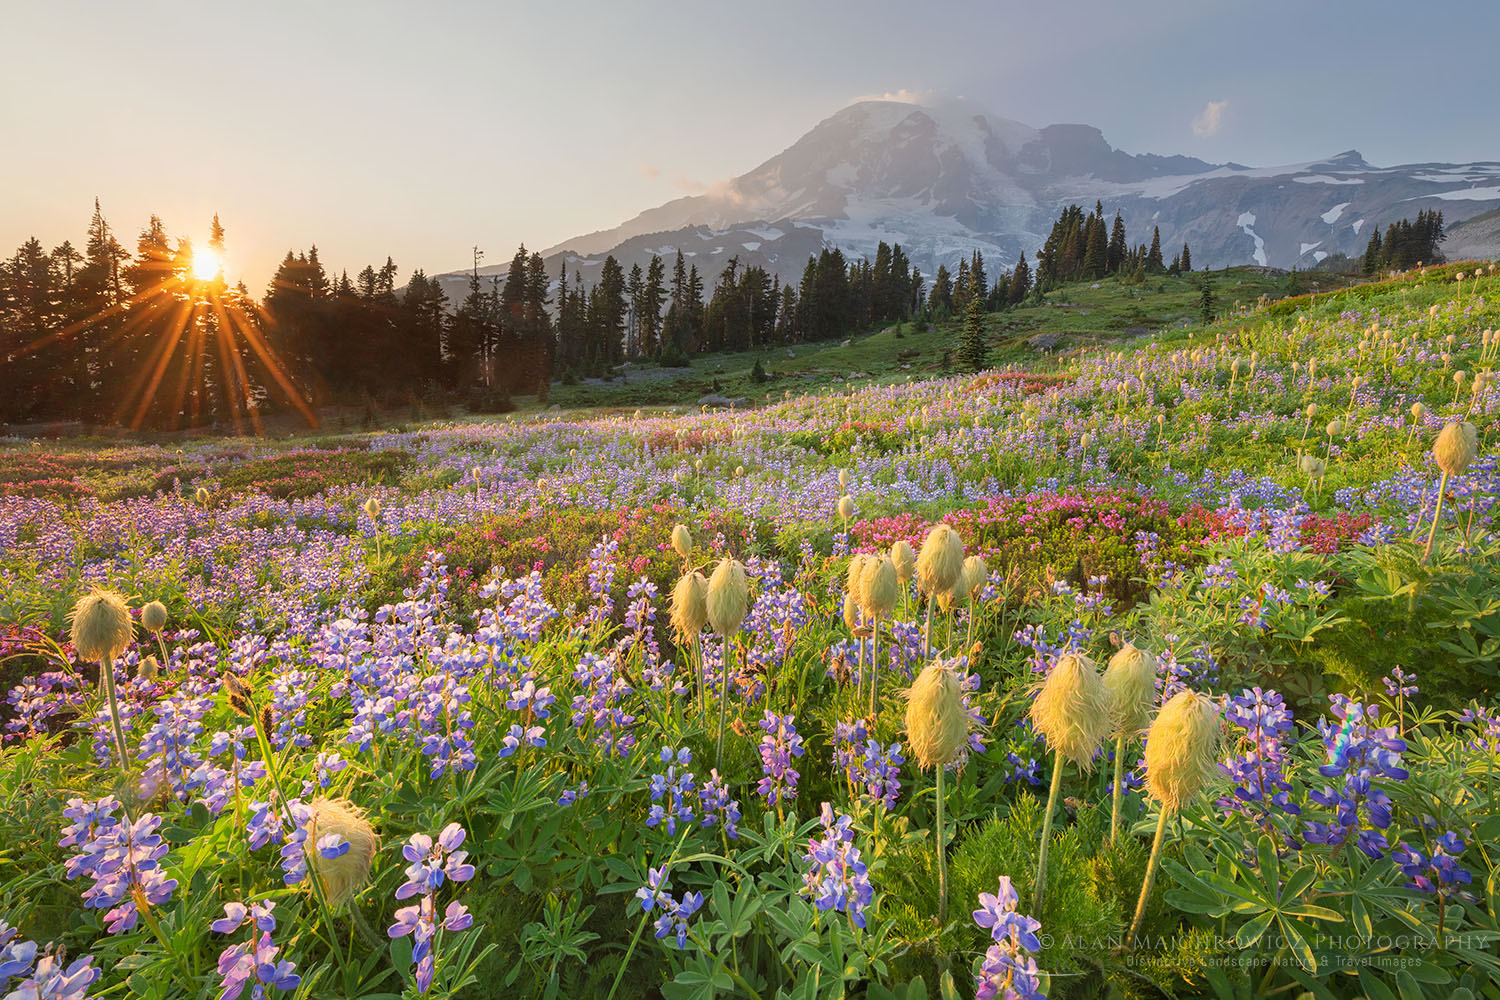 Sunset over Mount Rainier Paradise wildflower meadows. Containing a mixture of Western Anemone, Broadleaf Lupines, Pink Mountain Heather, and American Bistort. Mount Rainier National Park, Washington